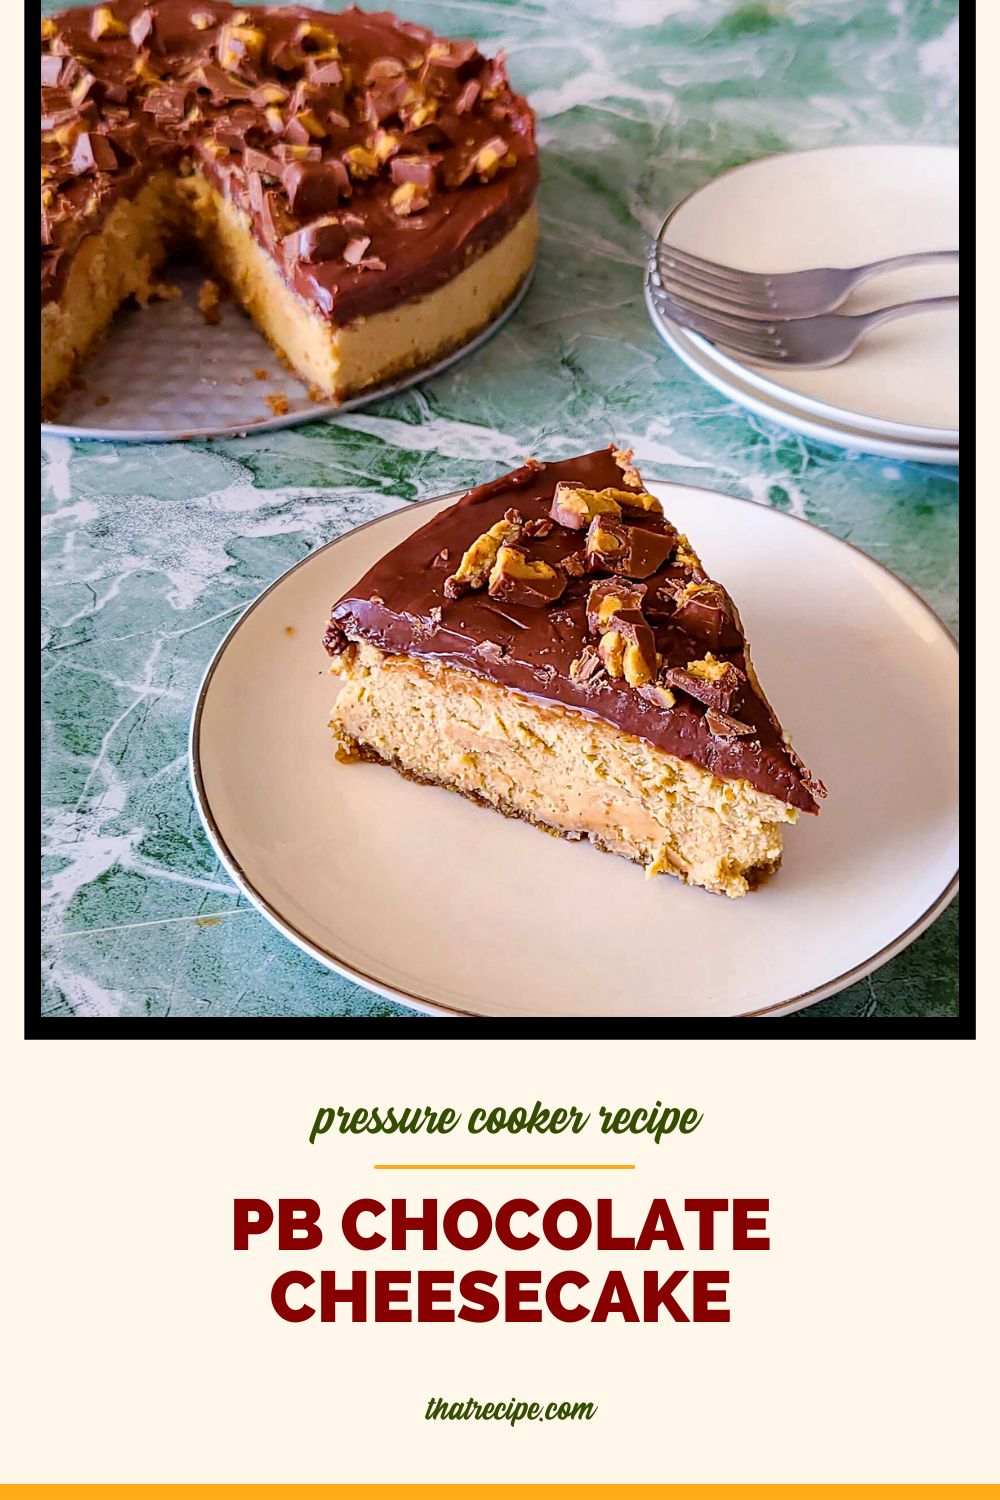 cheesecake slice on a plate with text overlay "chocolate peanut butter cheesecake"